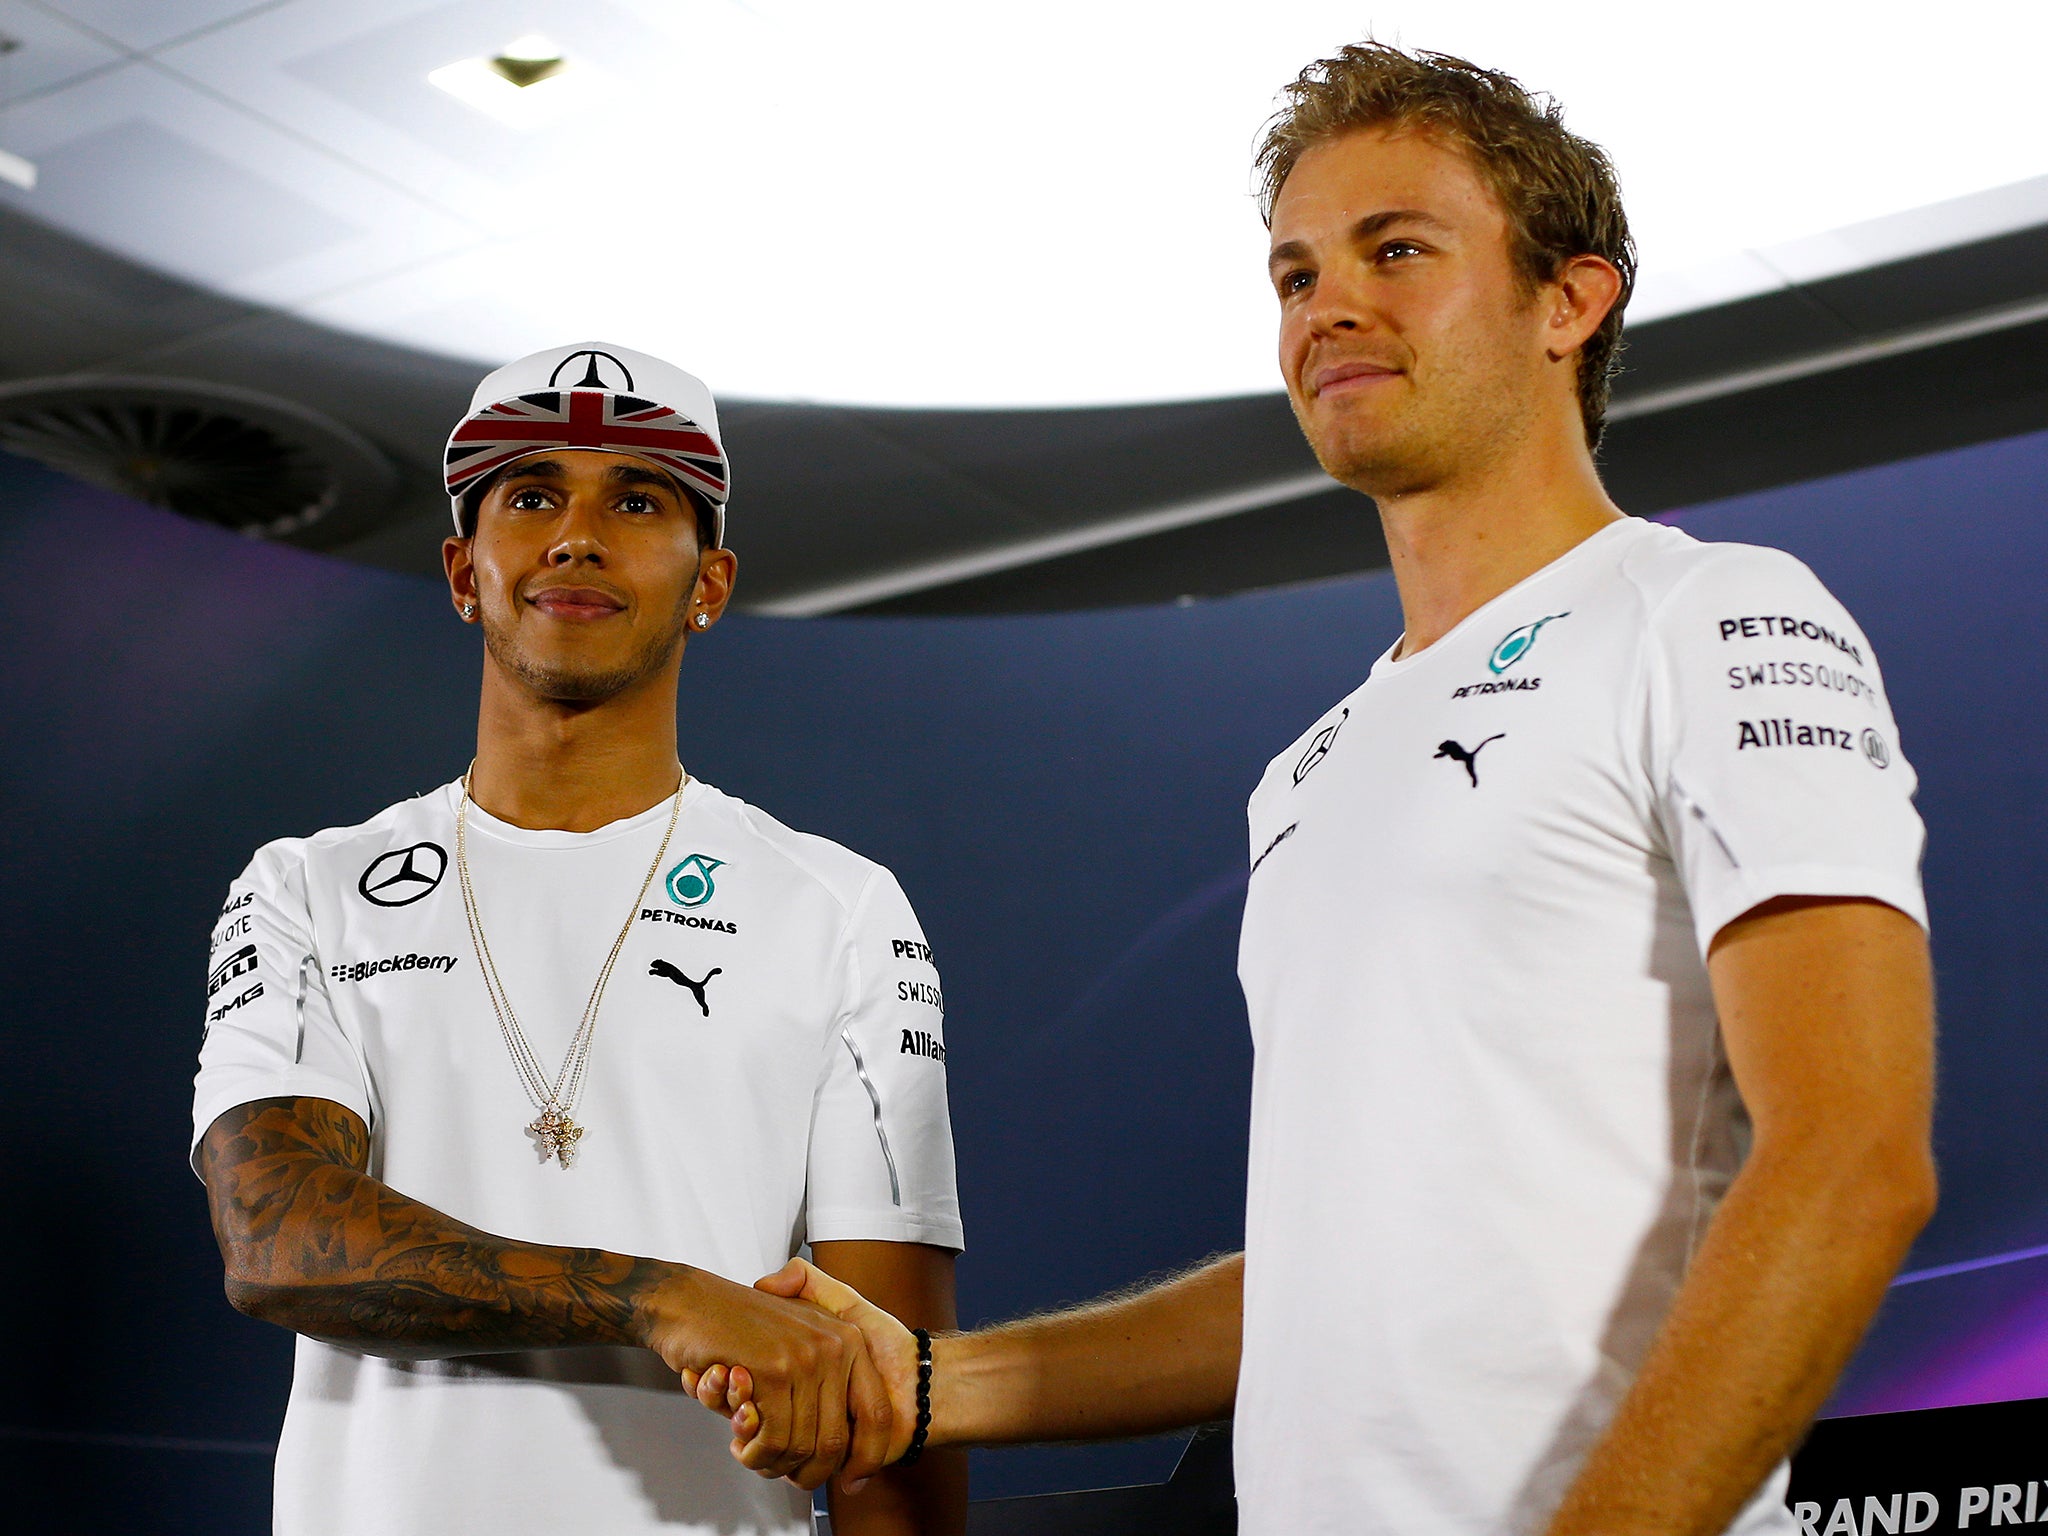 Lewis Hamilton of Great Britain and Mercedes GP shakes hands with Nico Rosberg of Germany and Mercedes GP before the drivers' press conference during previews ahead of the Abu Dhabi Formula One Grand Prix at Yas Marina Circuit on November 20, 2014 in Abu 